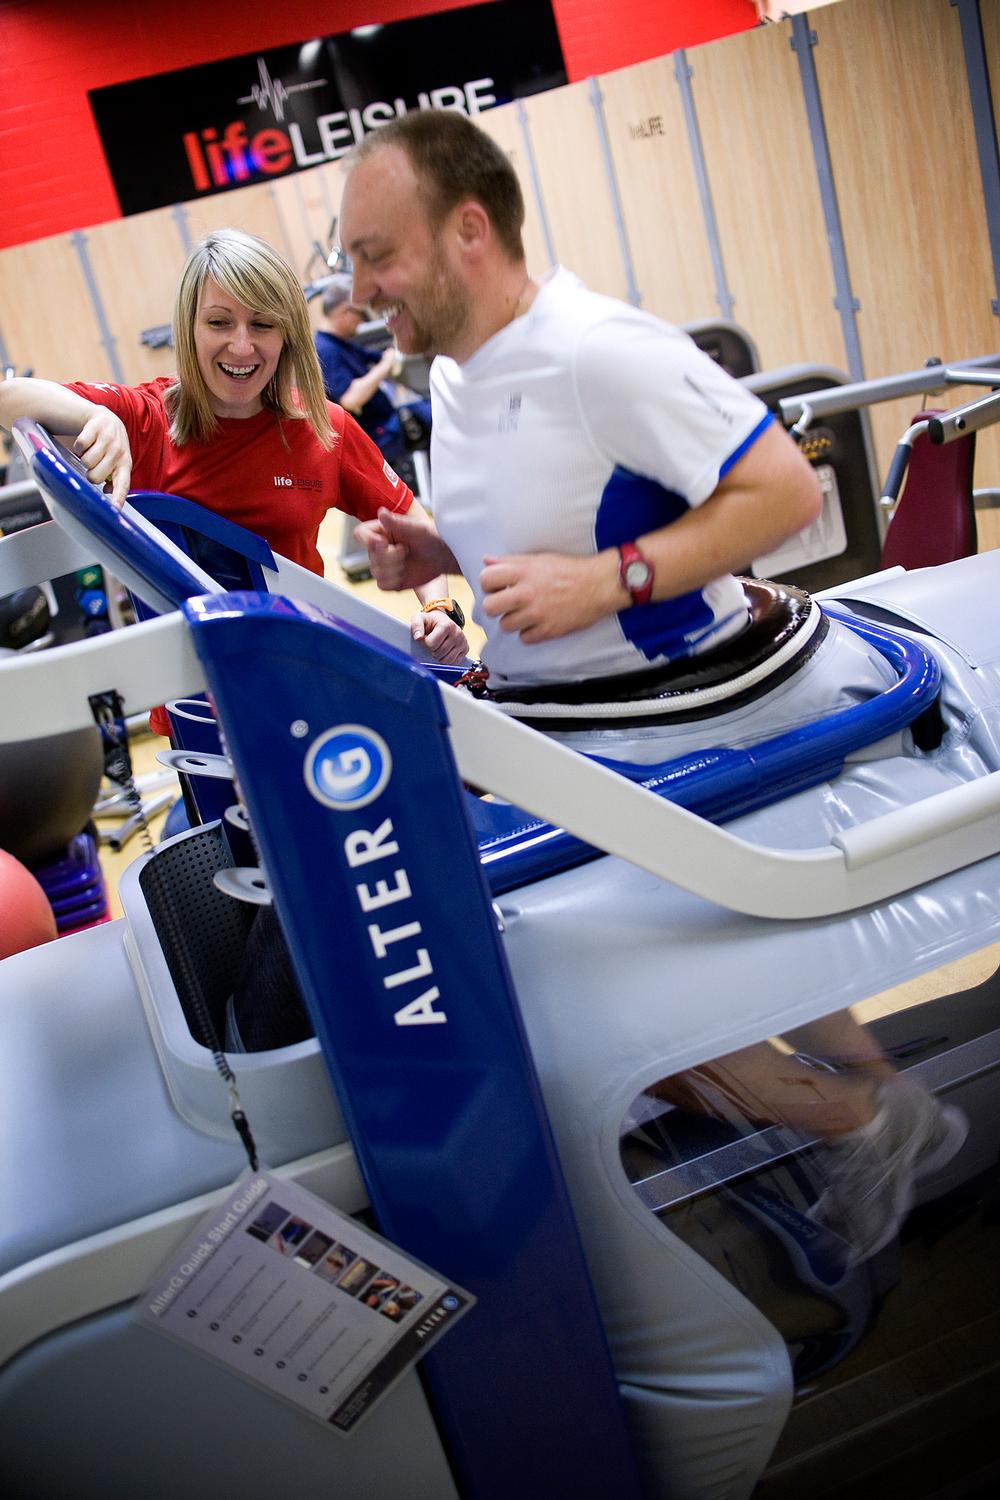 The AlterG anti-gravity treadmill enables larger people to exercise 
more comfortably